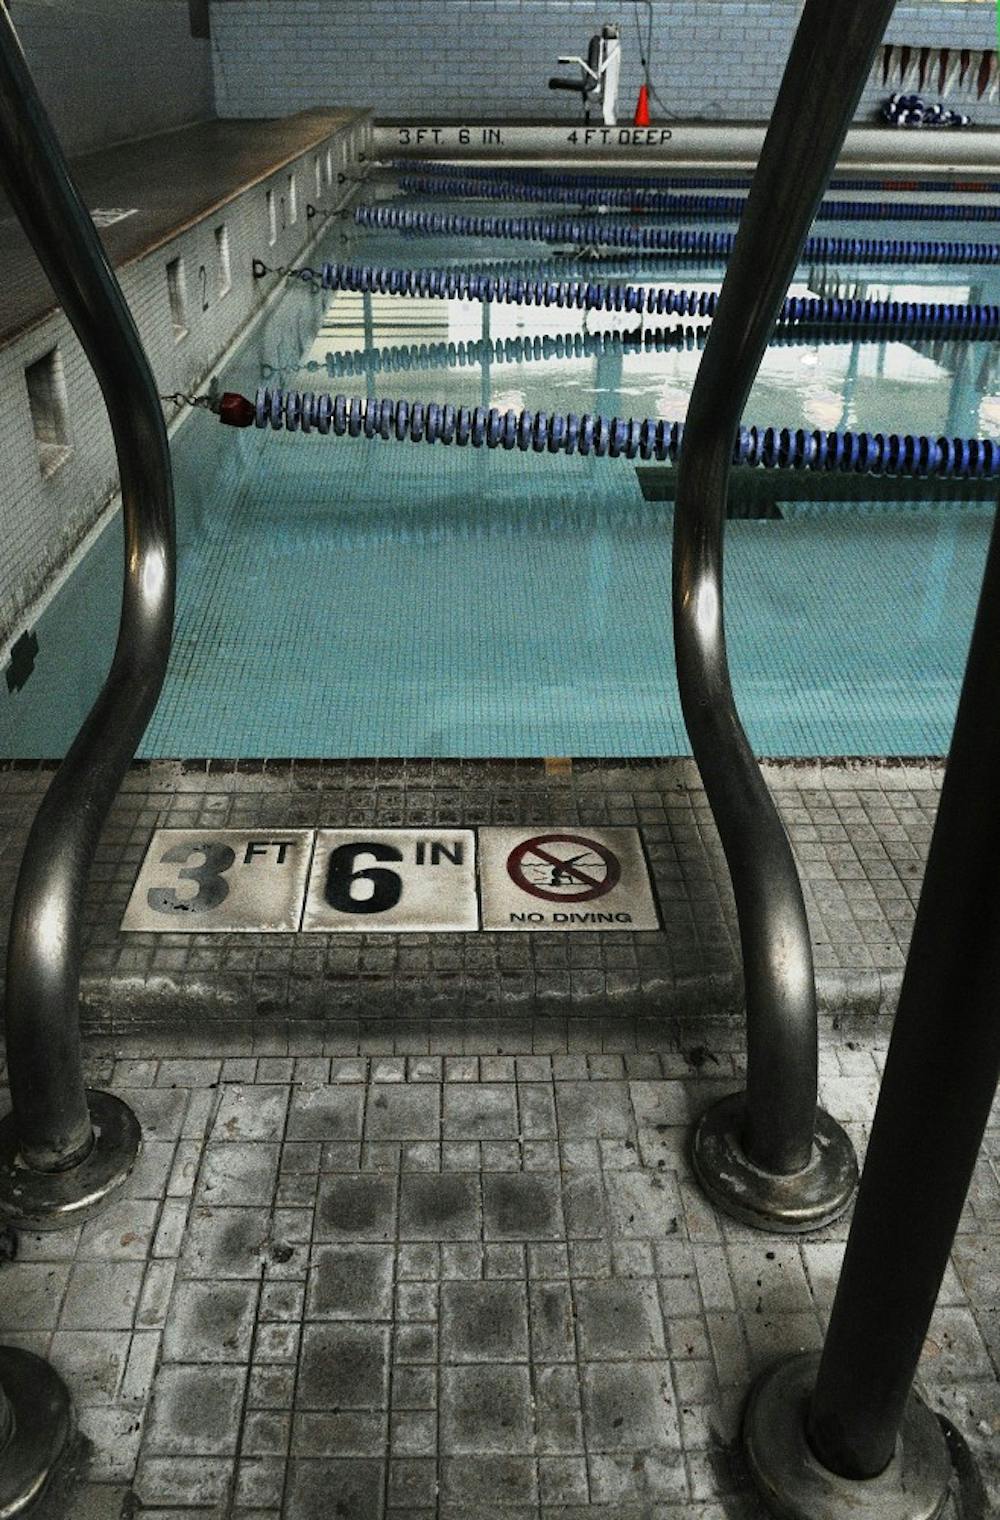 	Lifeguard Junior De La Cruz reported seeing a ghost at the doorway to the old swimming pool in Johnson Gym, pictured here. It is also rumored that a ghost haunts the Armond H. Seidler Natatorium Olympic Pool and its locker rooms.